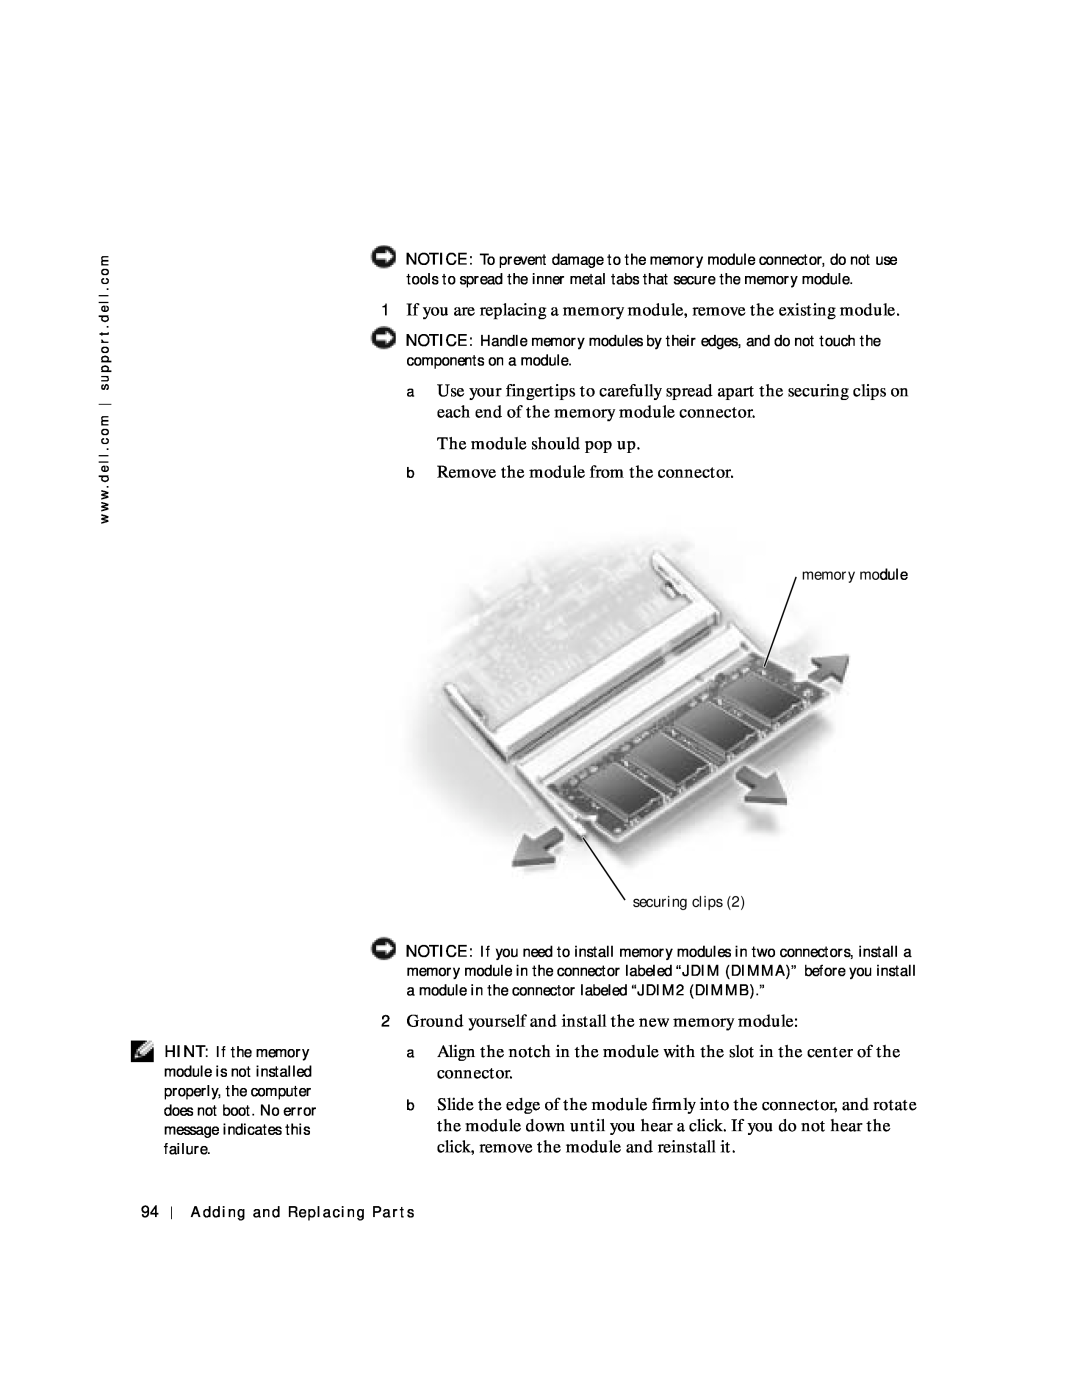 Dell 4150 owner manual If you are replacing a memory module, remove the existing module 